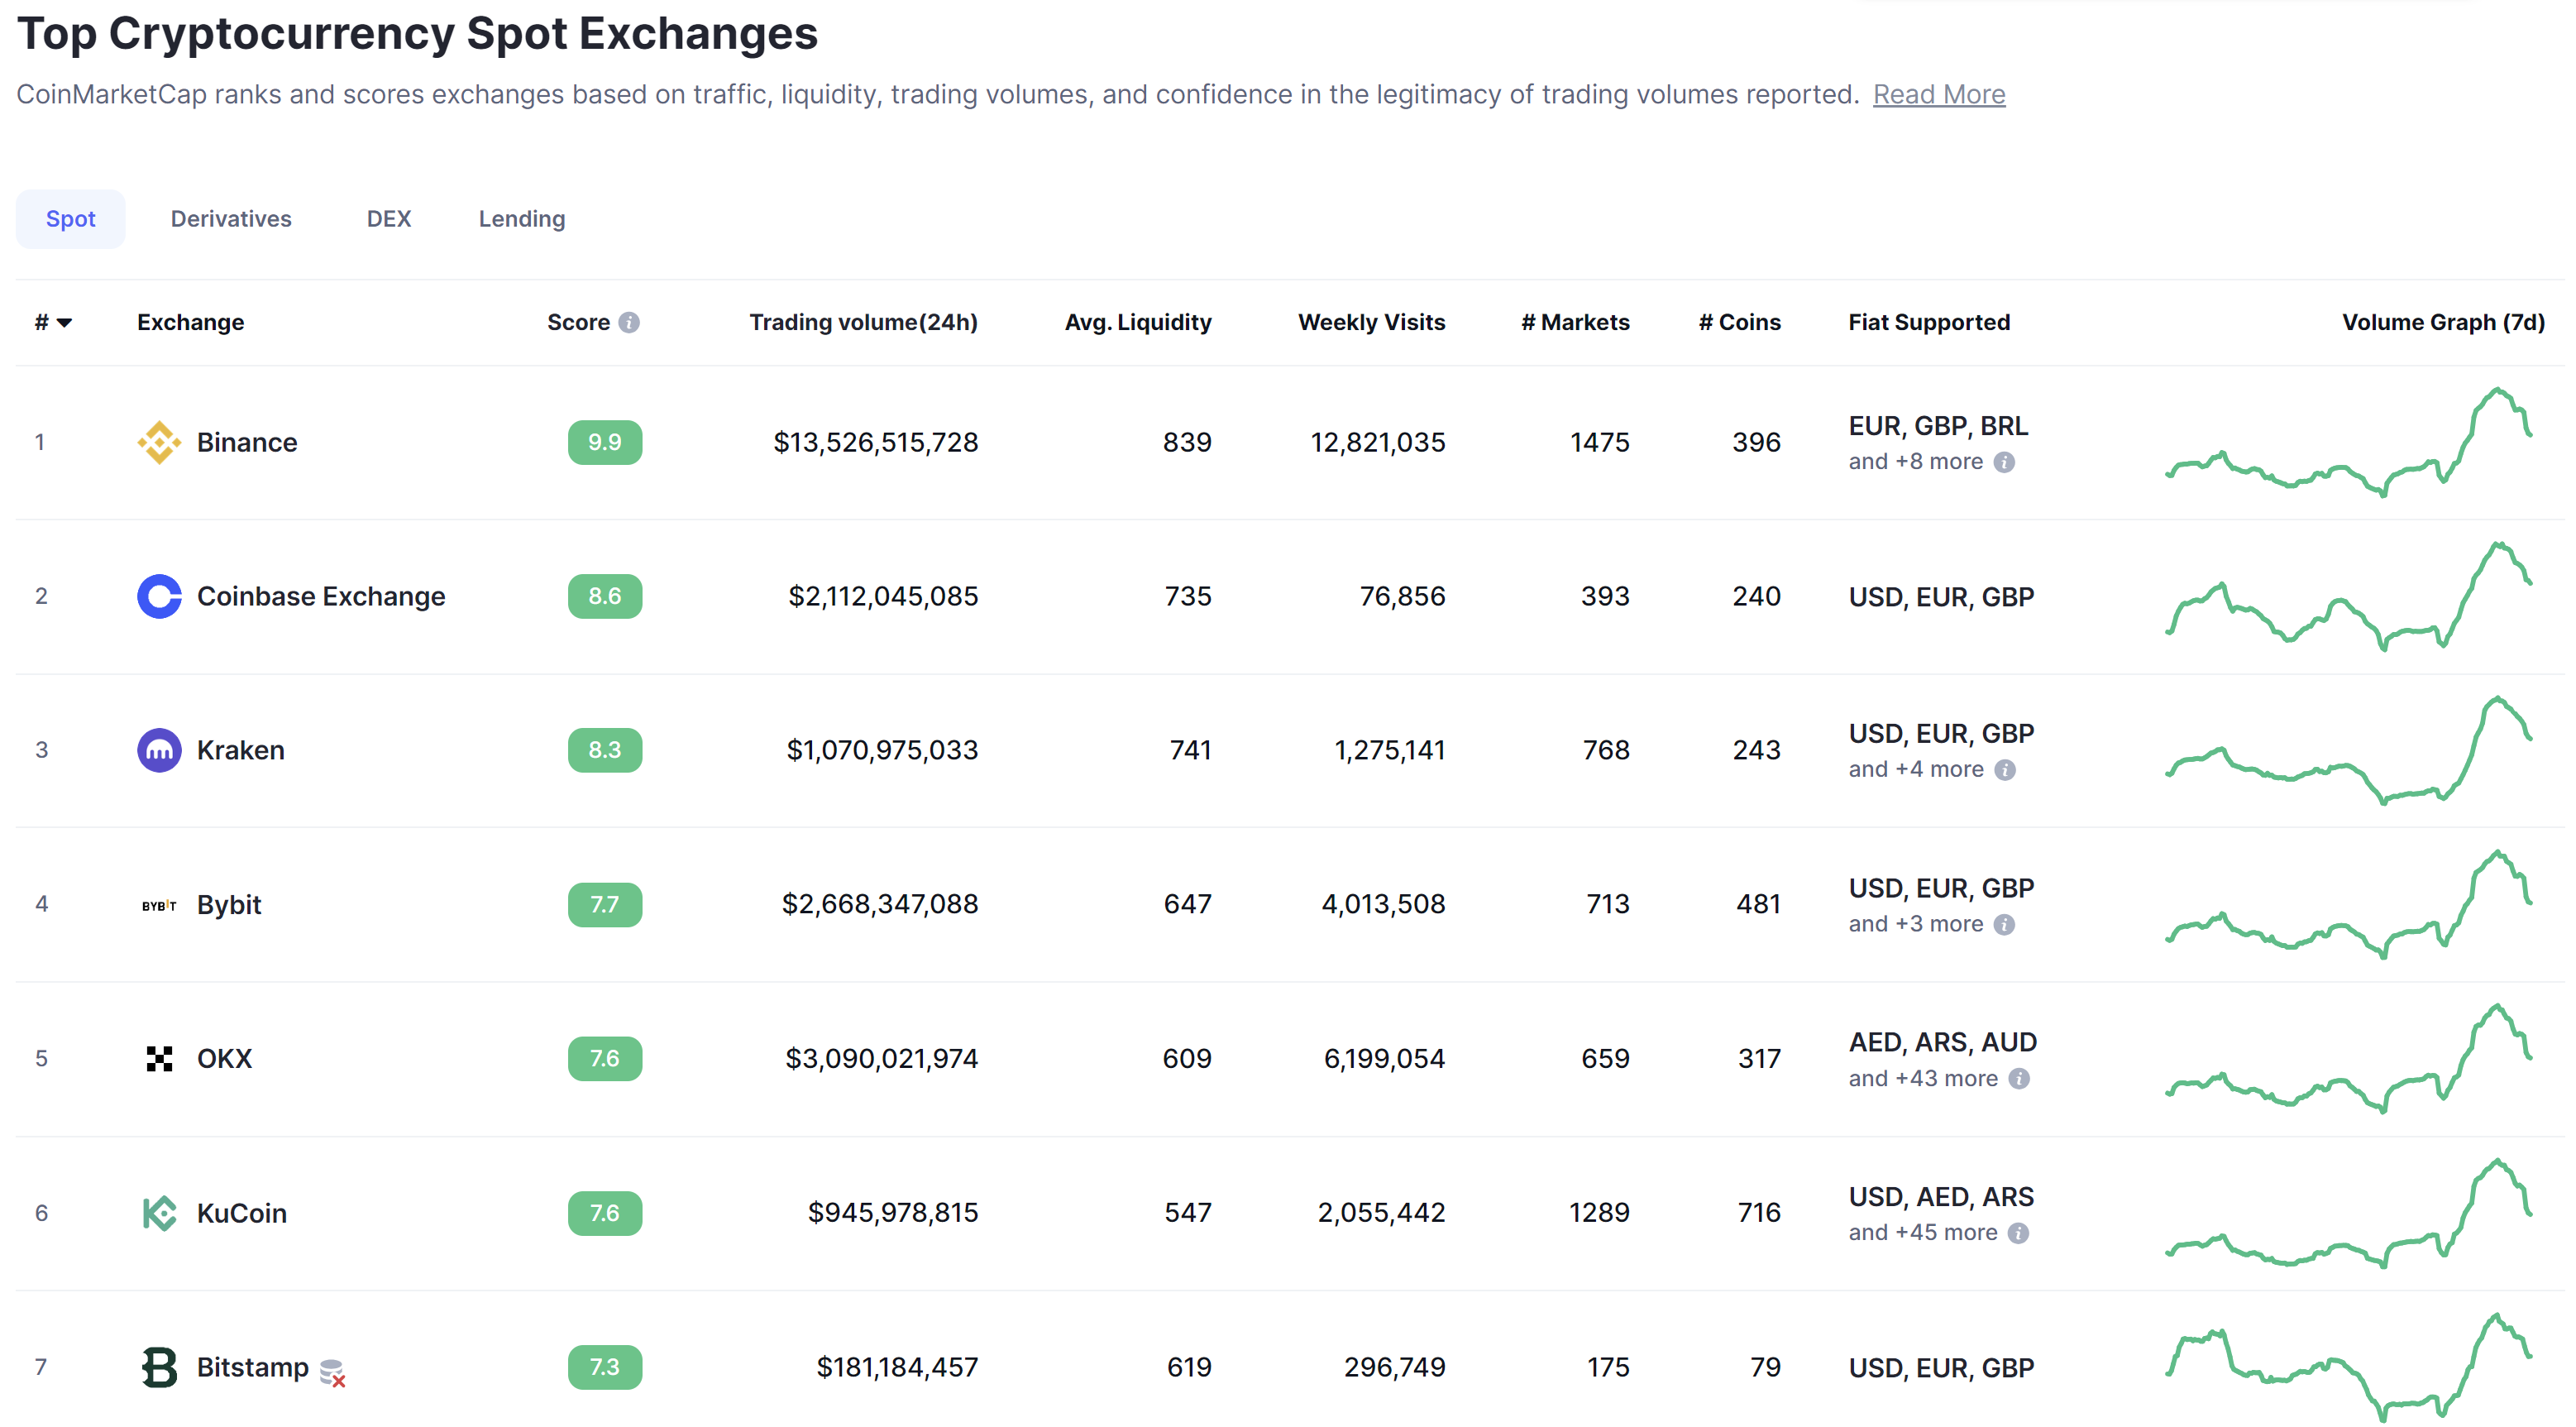 Where to trade bitcoin: most renowned exchanges